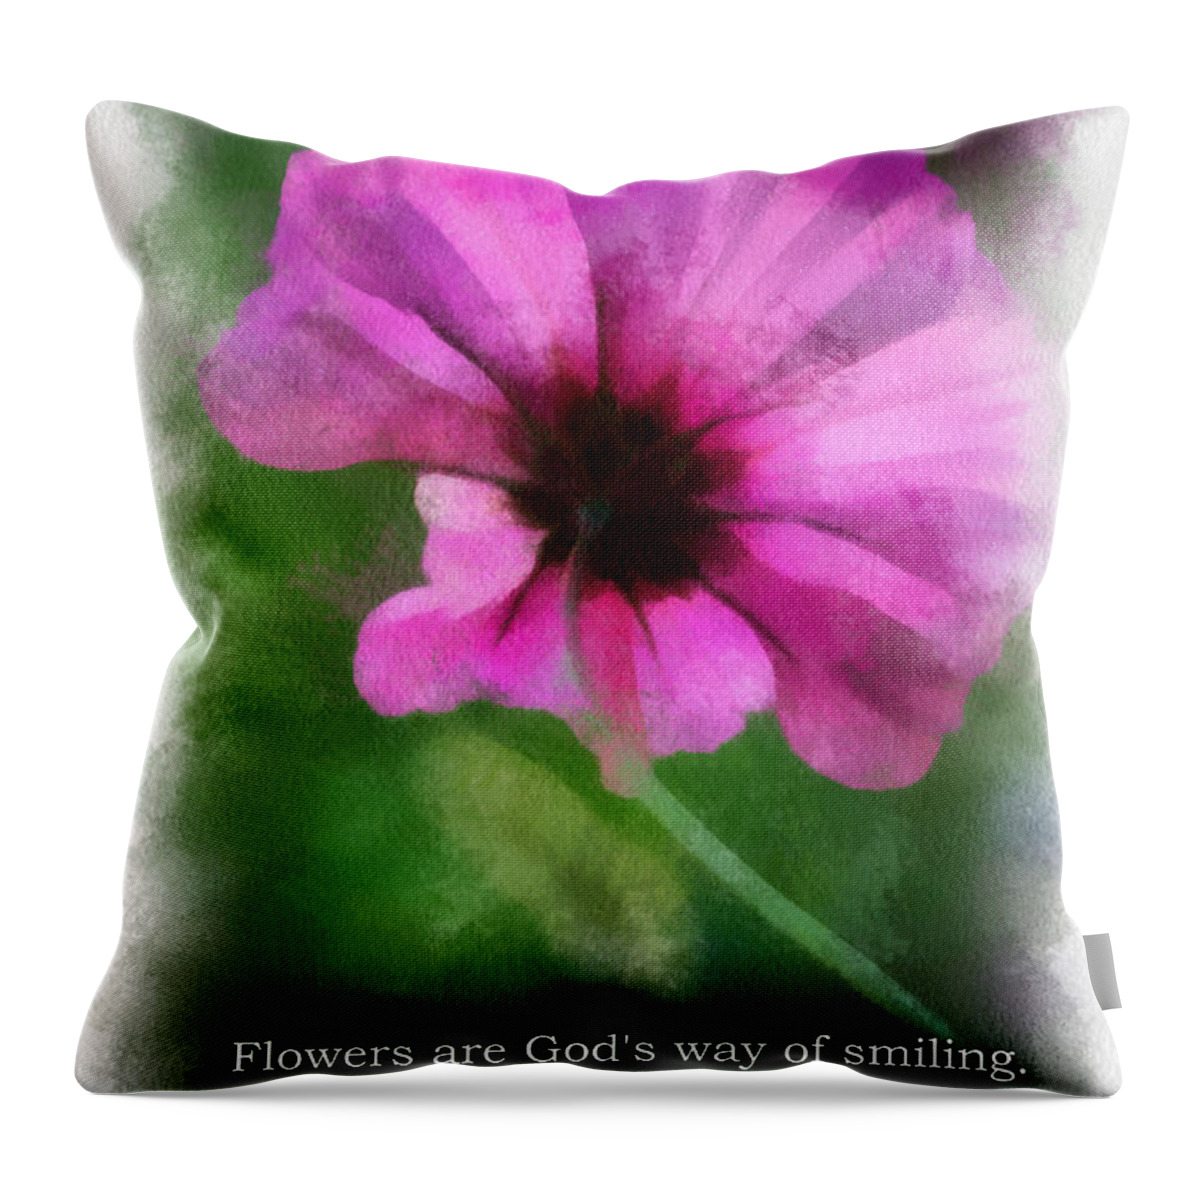 Flower Throw Pillow featuring the photograph Flowers Are Gods Way 01 by Thomas Woolworth